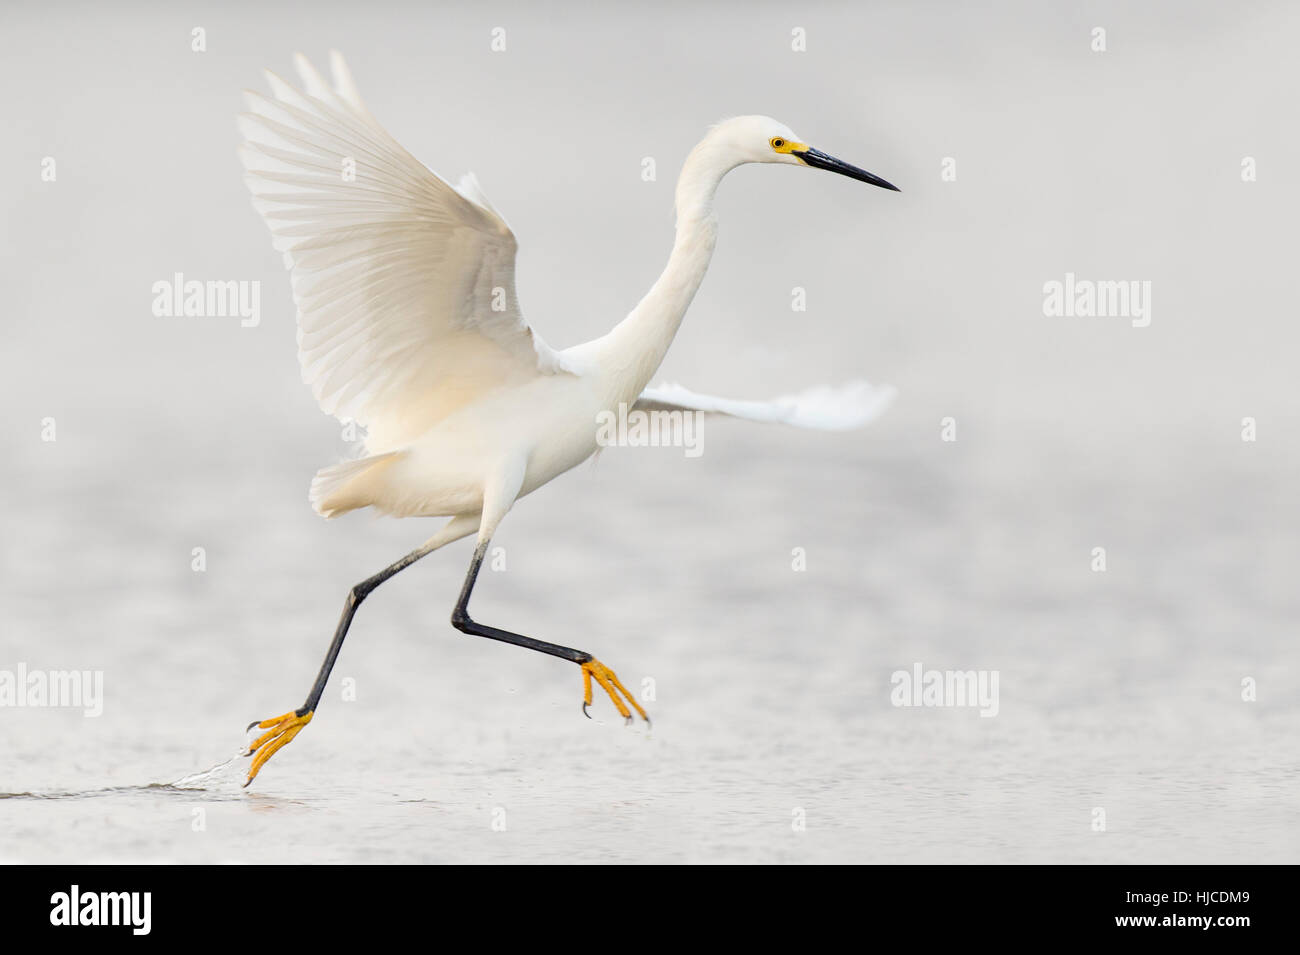 A Snowy Egret jumps and flaps around as it searches for food in the shallow water on an overcast day. Stock Photo